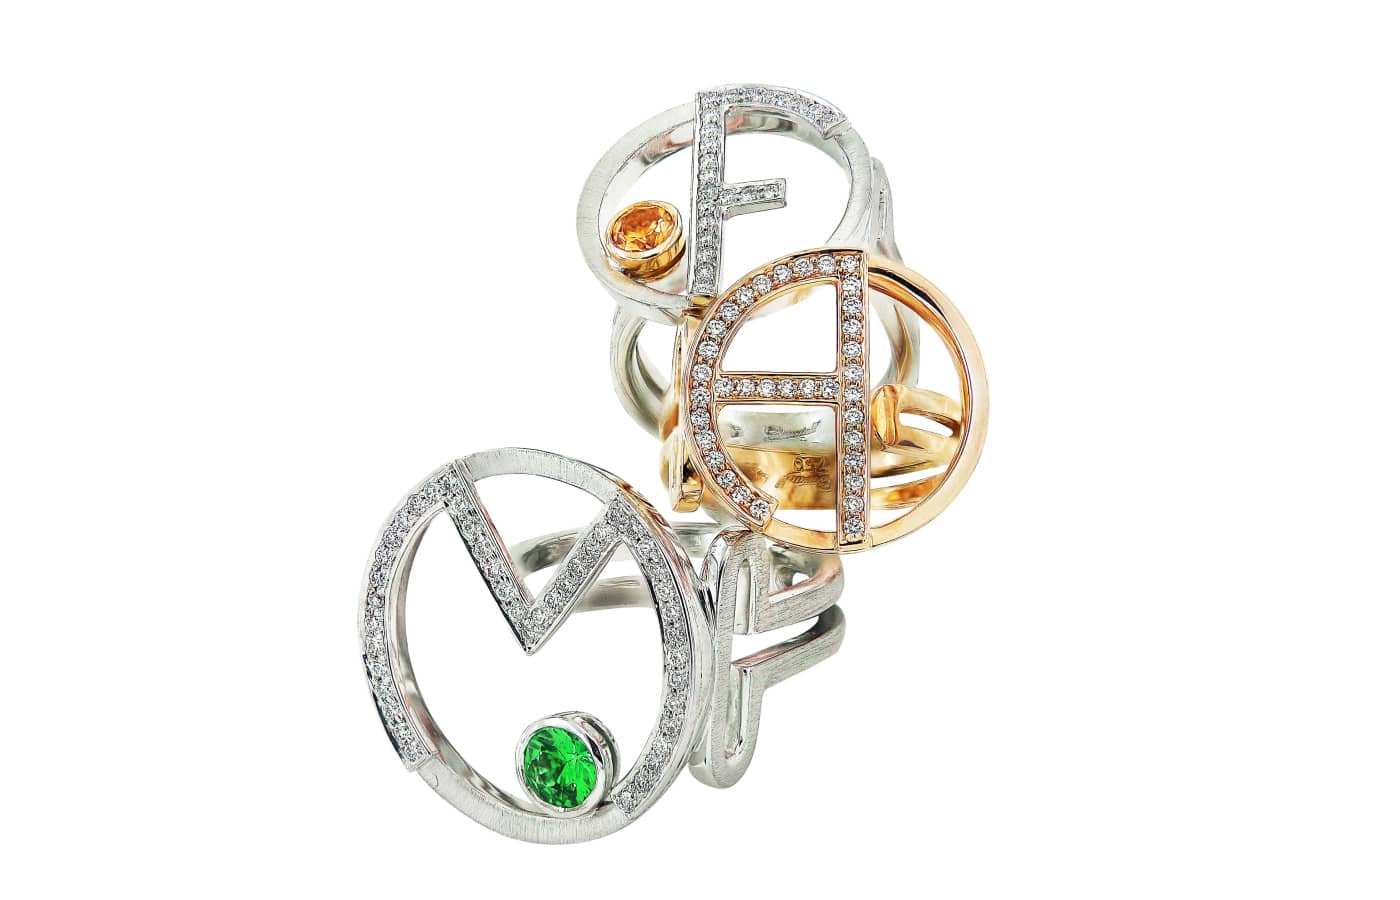 Caratell Letter rings in gold, white gold, emerald and diamond